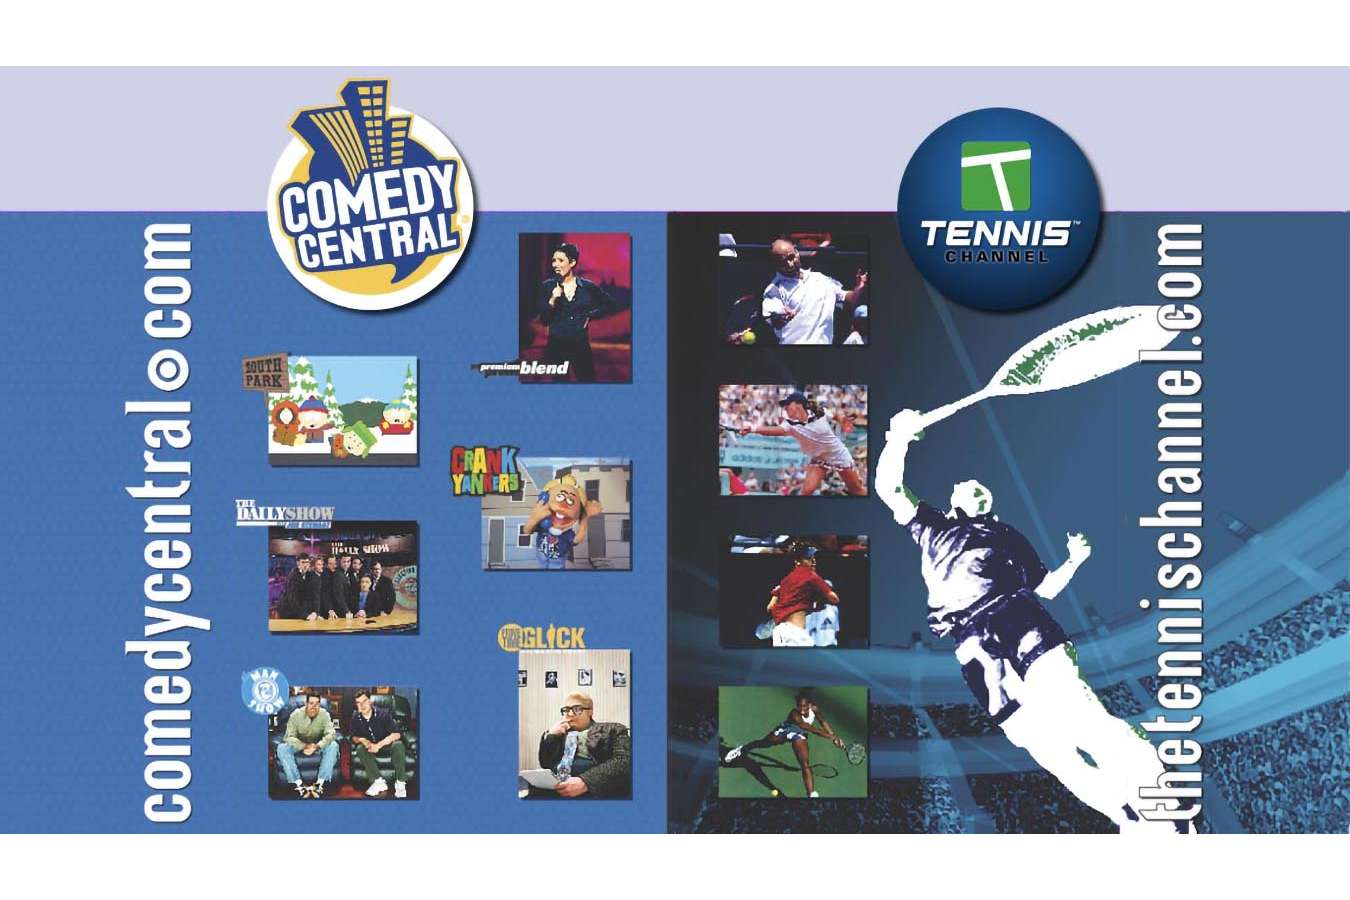 Display Grfx 5 : Comedy Central and the Tennis Channel combined table-top display